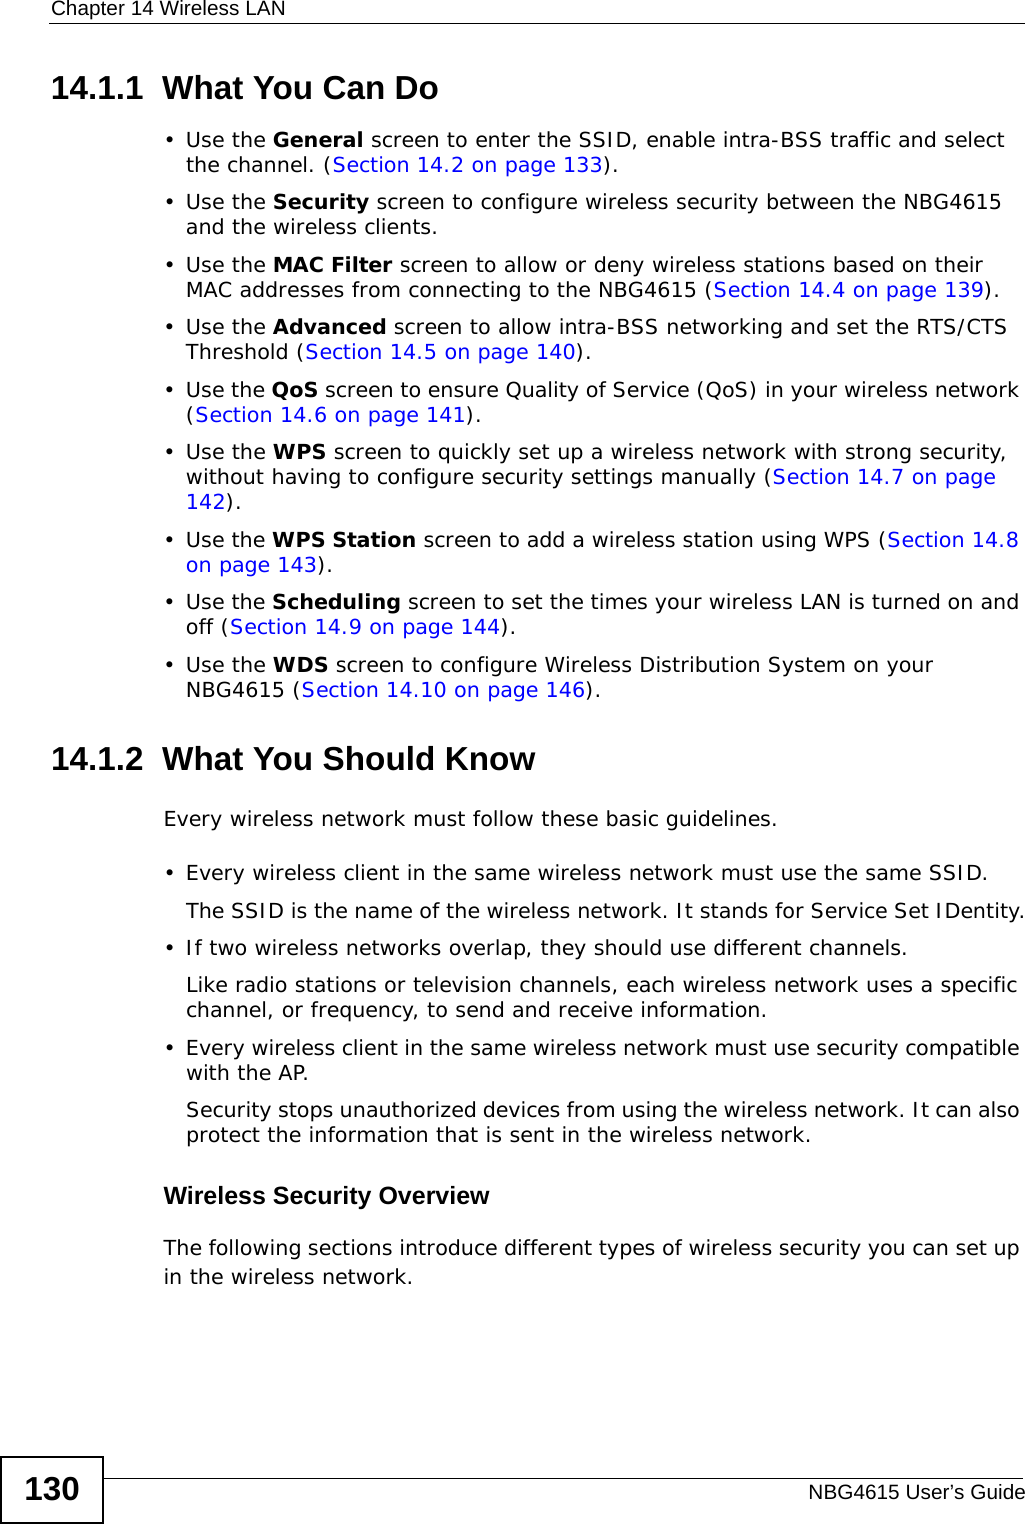 Chapter 14 Wireless LANNBG4615 User’s Guide13014.1.1  What You Can Do•Use the General screen to enter the SSID, enable intra-BSS traffic and select the channel. (Section 14.2 on page 133).•Use the Security screen to configure wireless security between the NBG4615 and the wireless clients. •Use the MAC Filter screen to allow or deny wireless stations based on their MAC addresses from connecting to the NBG4615 (Section 14.4 on page 139).•Use the Advanced screen to allow intra-BSS networking and set the RTS/CTS Threshold (Section 14.5 on page 140).•Use the QoS screen to ensure Quality of Service (QoS) in your wireless network (Section 14.6 on page 141).•Use the WPS screen to quickly set up a wireless network with strong security, without having to configure security settings manually (Section 14.7 on page 142).•Use the WPS Station screen to add a wireless station using WPS (Section 14.8 on page 143). •Use the Scheduling screen to set the times your wireless LAN is turned on and off (Section 14.9 on page 144).•Use the WDS screen to configure Wireless Distribution System on your NBG4615 (Section 14.10 on page 146).14.1.2  What You Should KnowEvery wireless network must follow these basic guidelines.• Every wireless client in the same wireless network must use the same SSID.The SSID is the name of the wireless network. It stands for Service Set IDentity.• If two wireless networks overlap, they should use different channels.Like radio stations or television channels, each wireless network uses a specific channel, or frequency, to send and receive information.• Every wireless client in the same wireless network must use security compatible with the AP.Security stops unauthorized devices from using the wireless network. It can also protect the information that is sent in the wireless network.Wireless Security OverviewThe following sections introduce different types of wireless security you can set up in the wireless network.